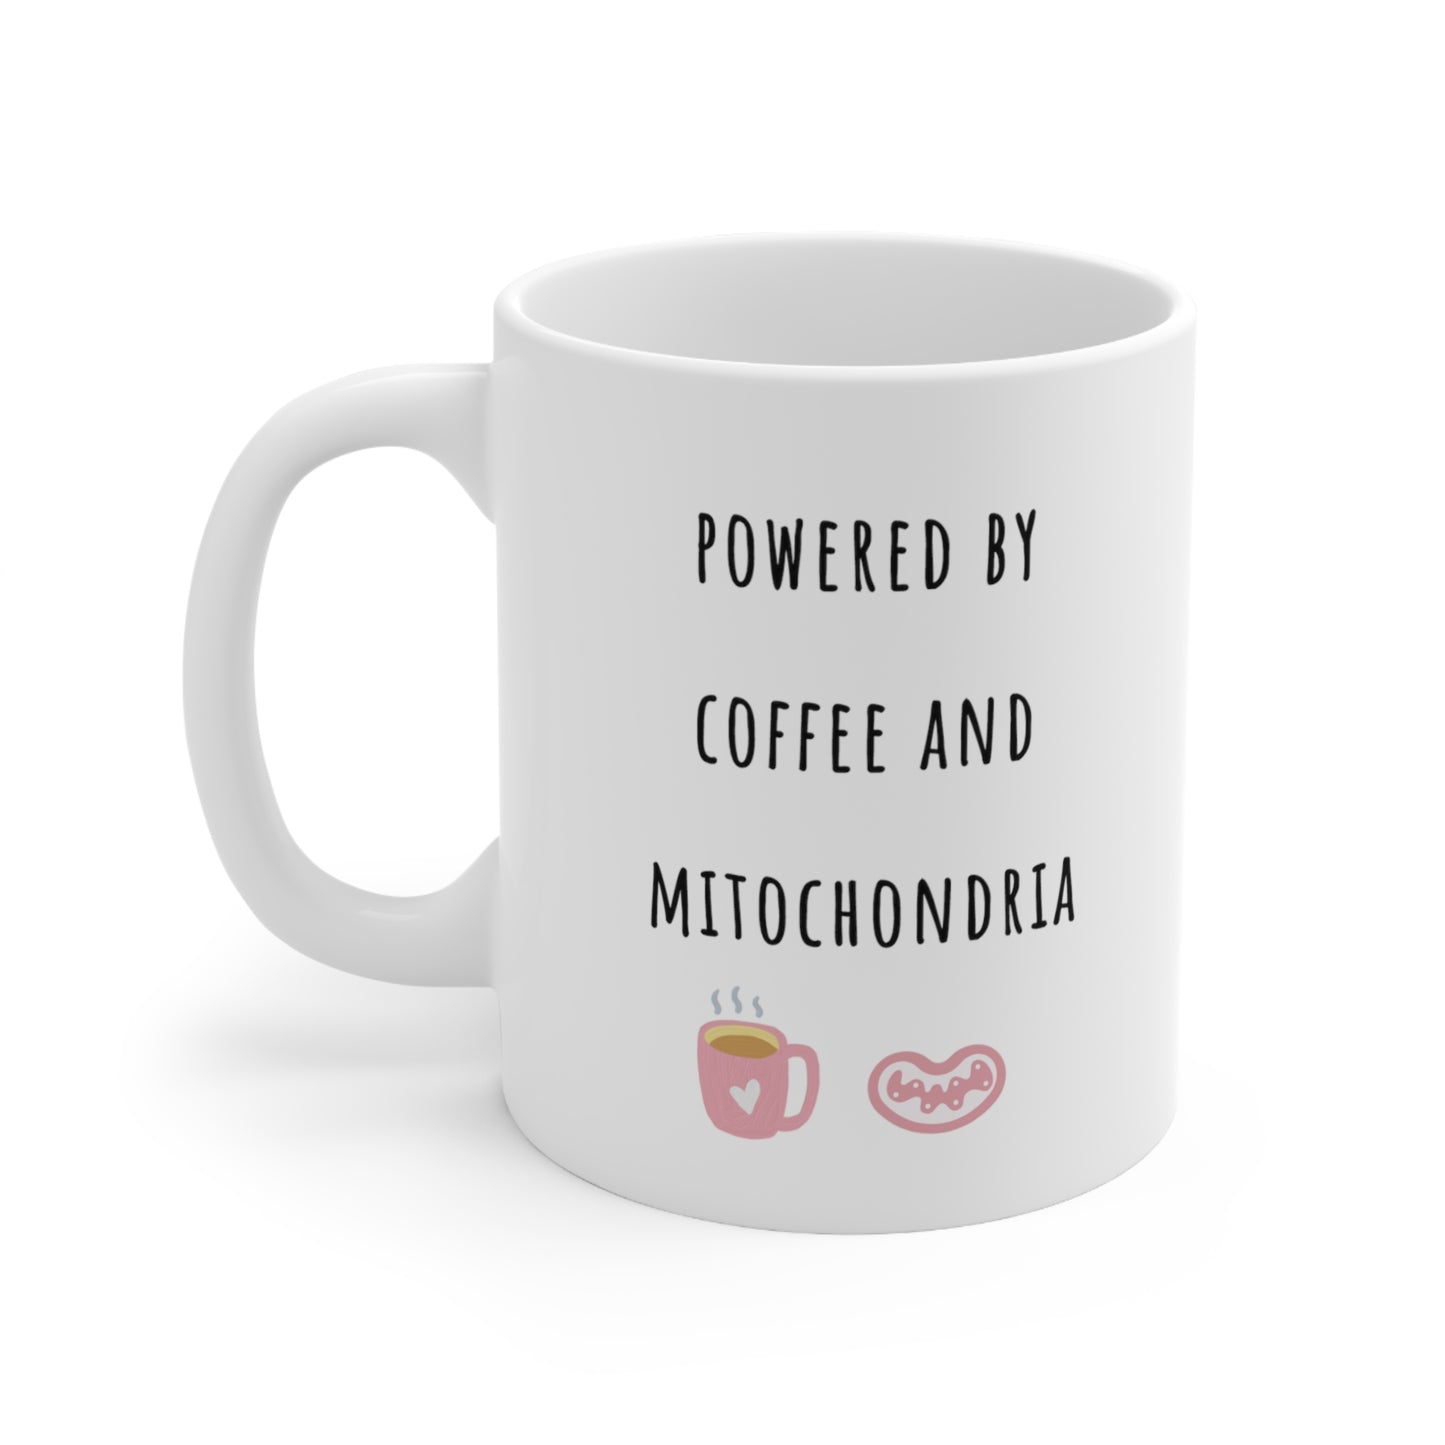 Powered by coffee and mitochondria, Cellular Biology, Science mug, Medical researcher, Science teacher, Physiology, Medical humor, graduation gift.